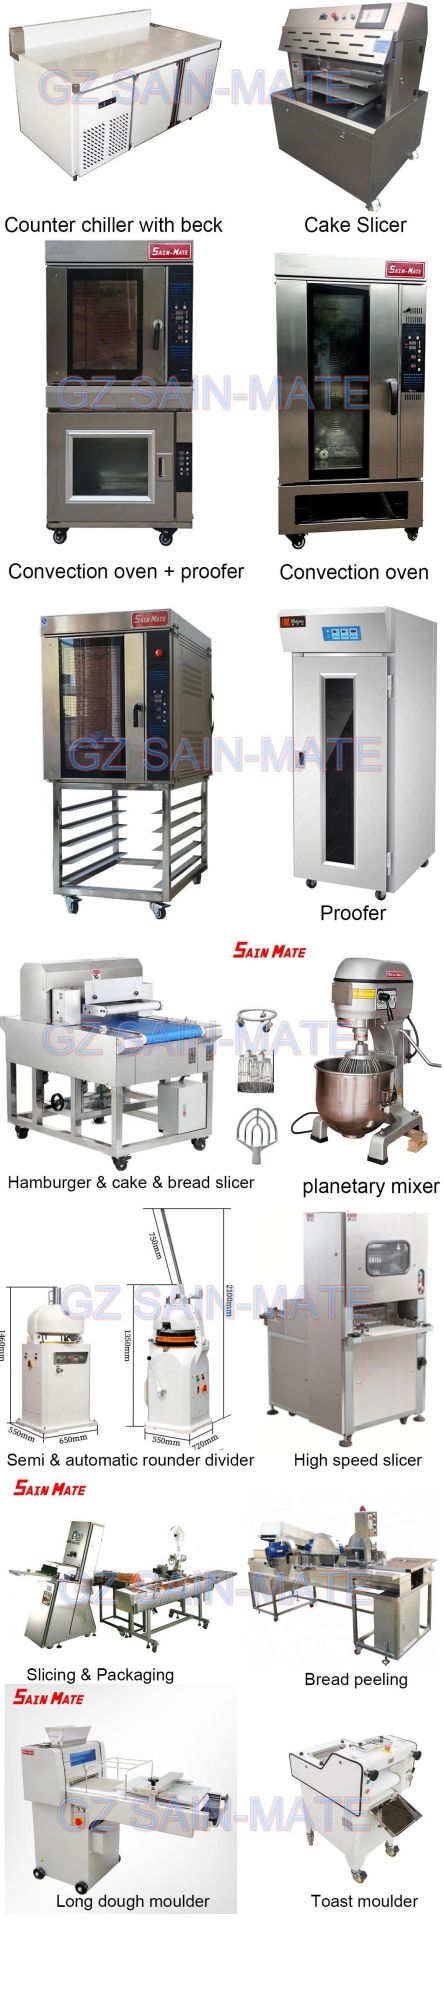 Guangzhouzhou Manufacturers Selling Cheaper Price Rotary Oven, Hot Wind 32 Tray Cheap Rotary Oven Price